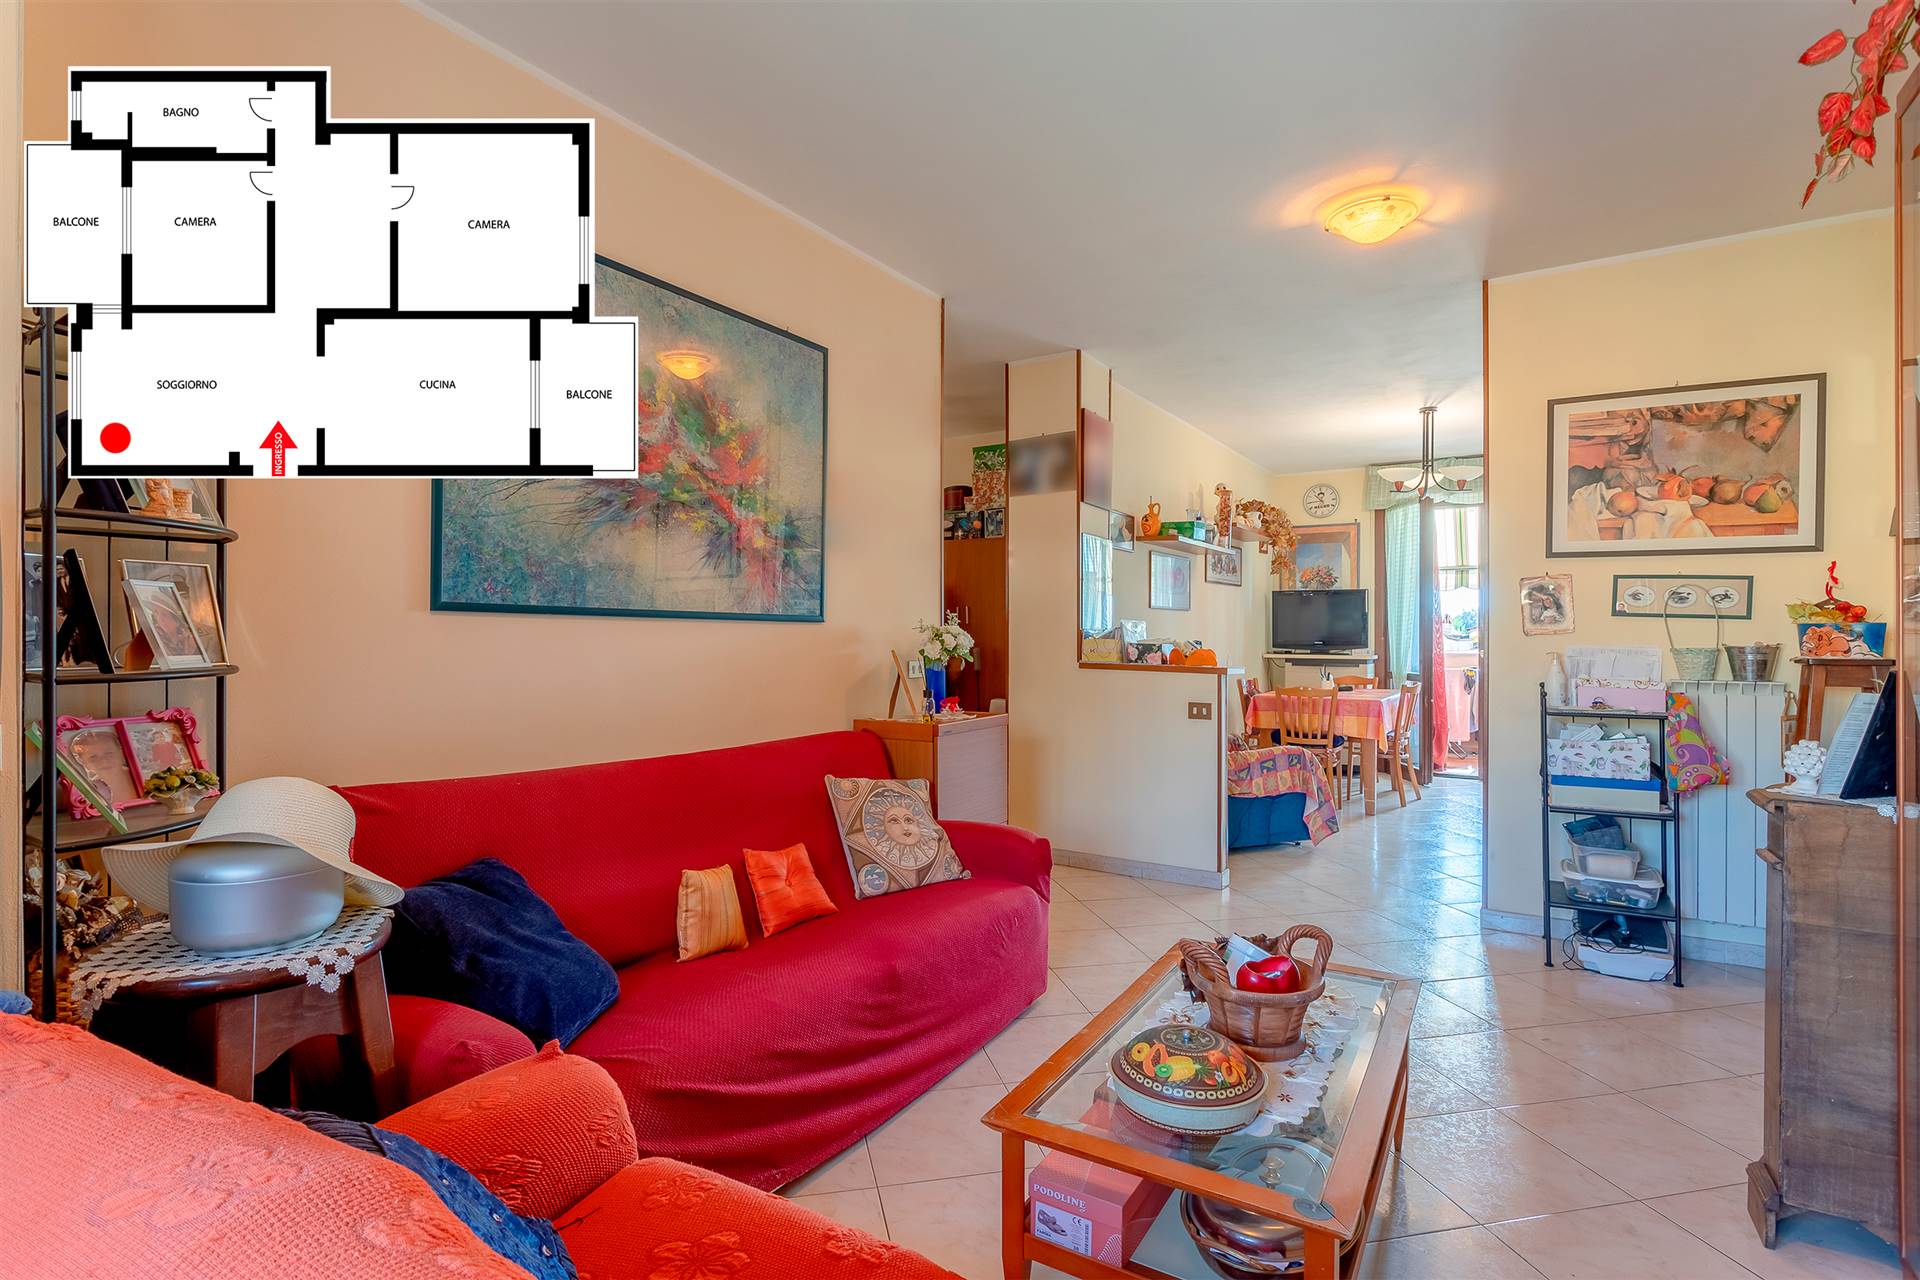 SAN LORENZO, CAMPI BISENZIO, Apartment for sale of 81 Sq. mt., Good condition, Heating Individual heating system, Energetic class: G, placed at 4° on 6, composed by: 4 Rooms, Separate kitchen, , 2 